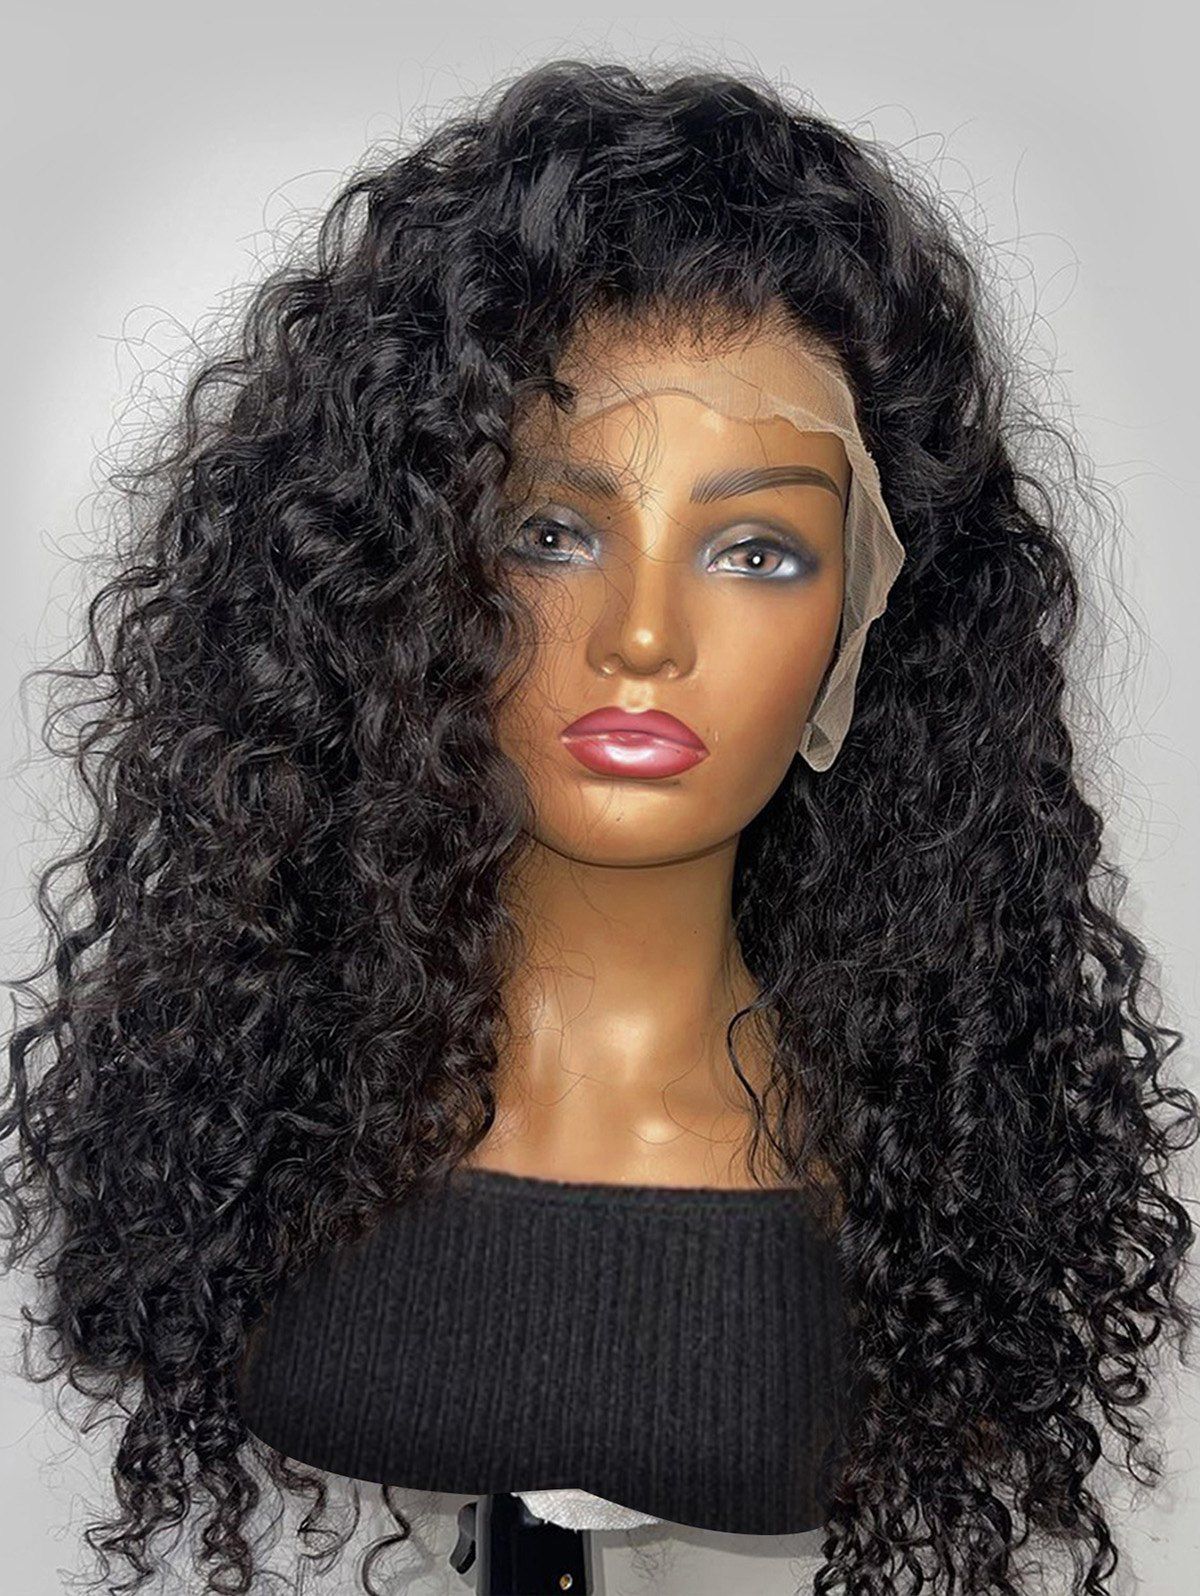 13*4 Lace Front 180% Human Hair Afro Curly Wig - BLACK 12INCH